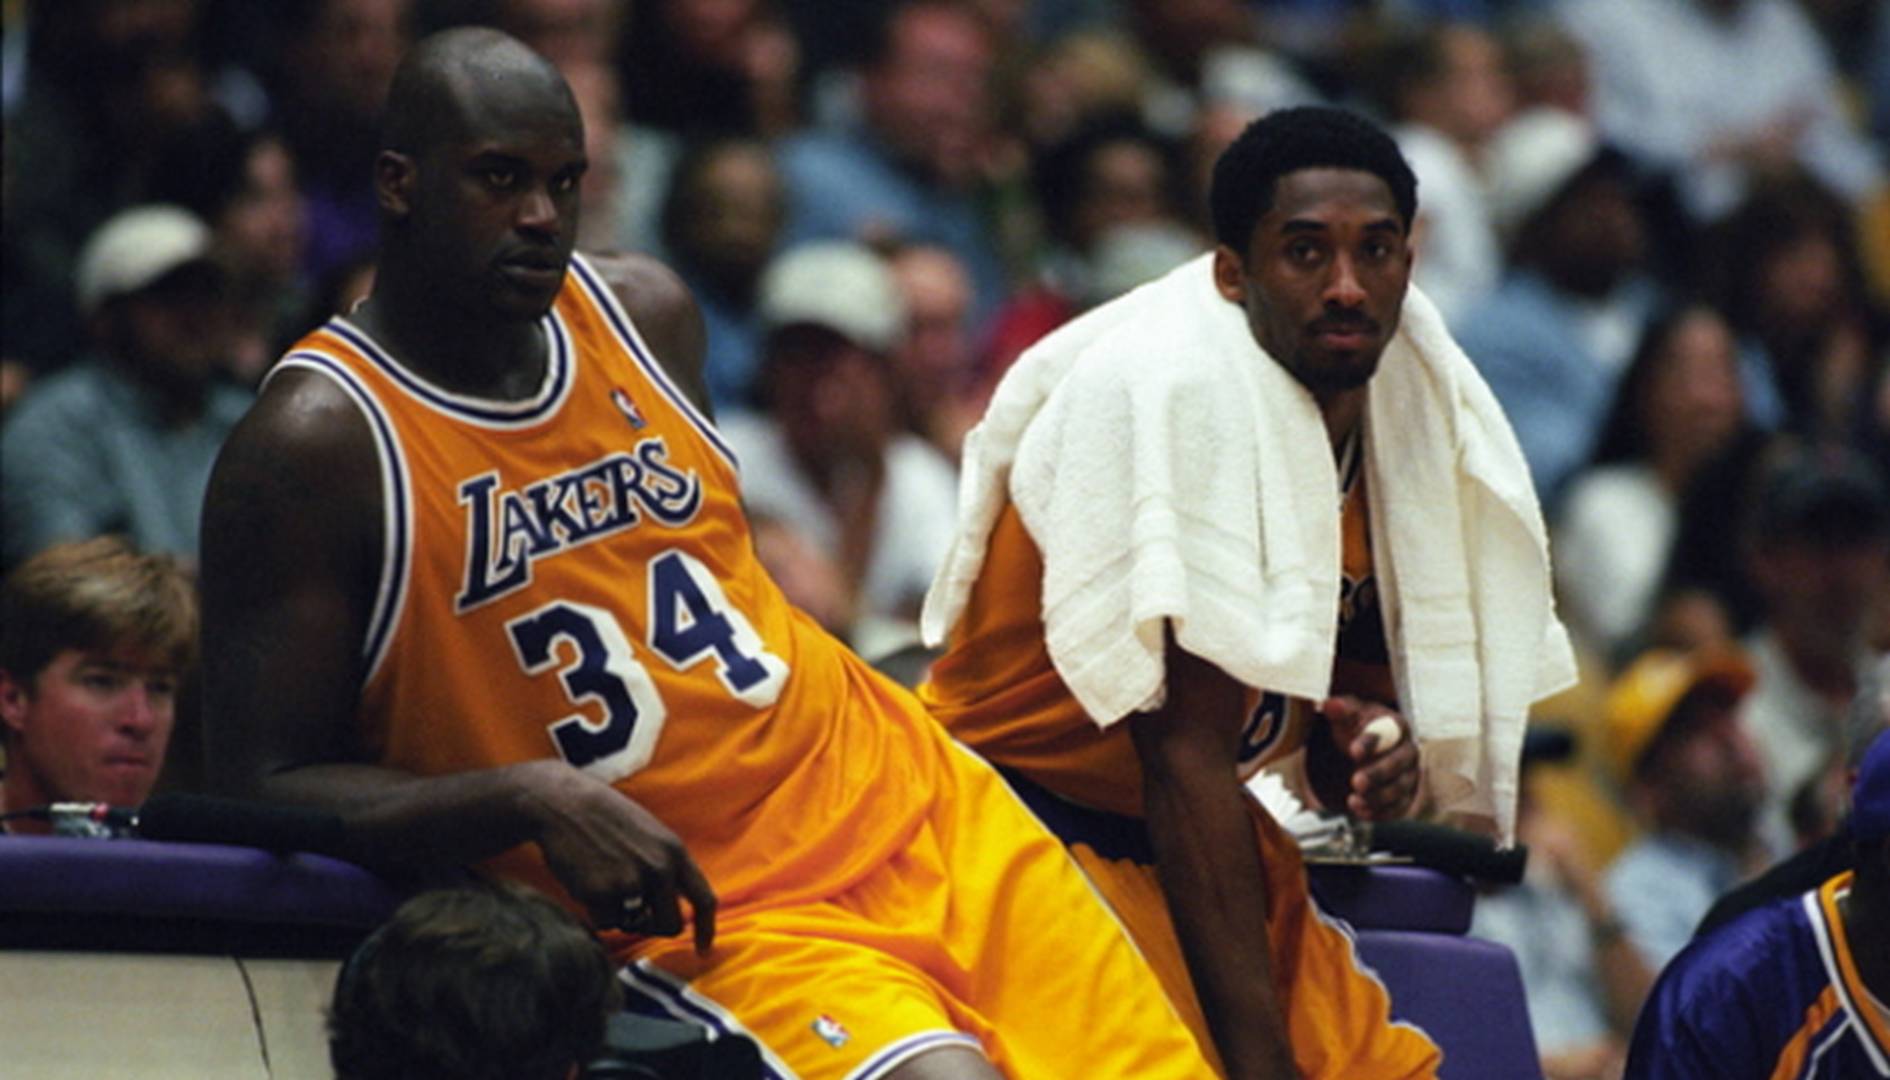 Free download FunMozar Shaquille Oneal Lakers Wallpaper